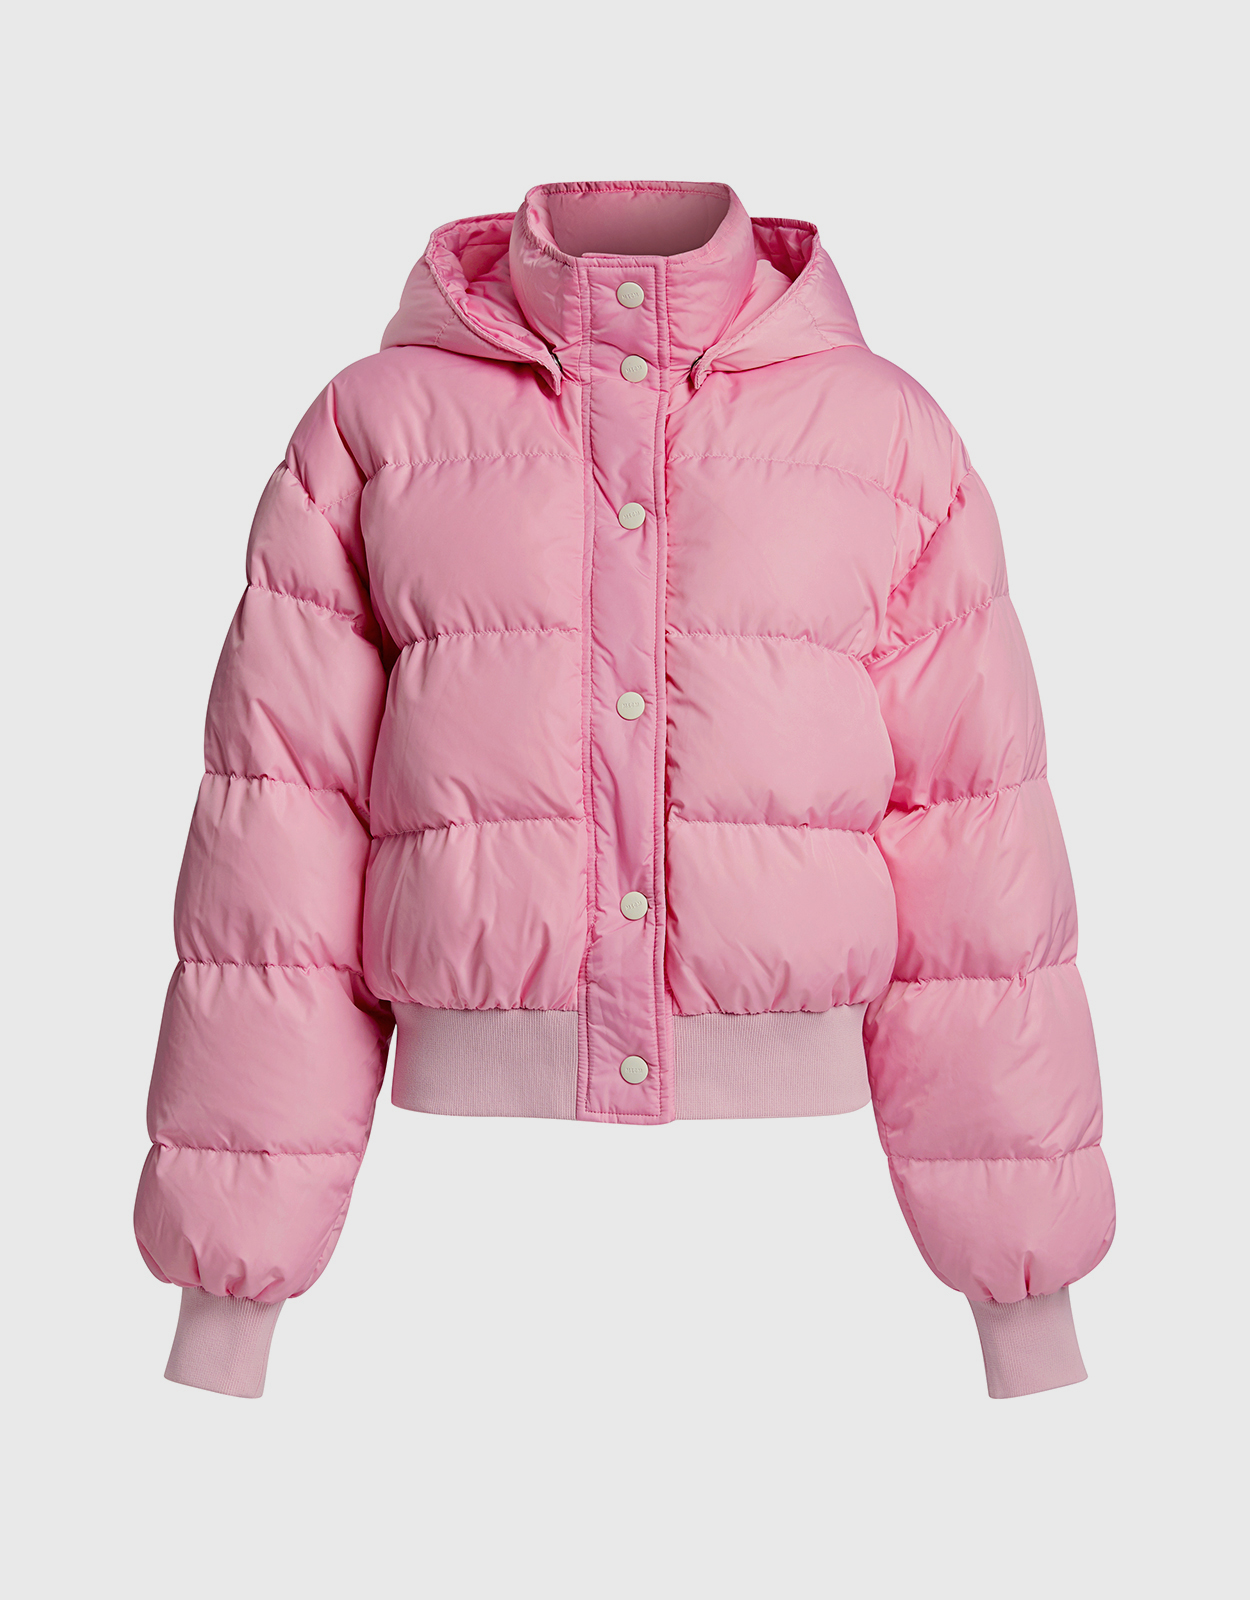 MSGM Logo Hoodie Down Cropped Jacket (Jackets,Down and Puffer Jacket)  IFCHIC.COM